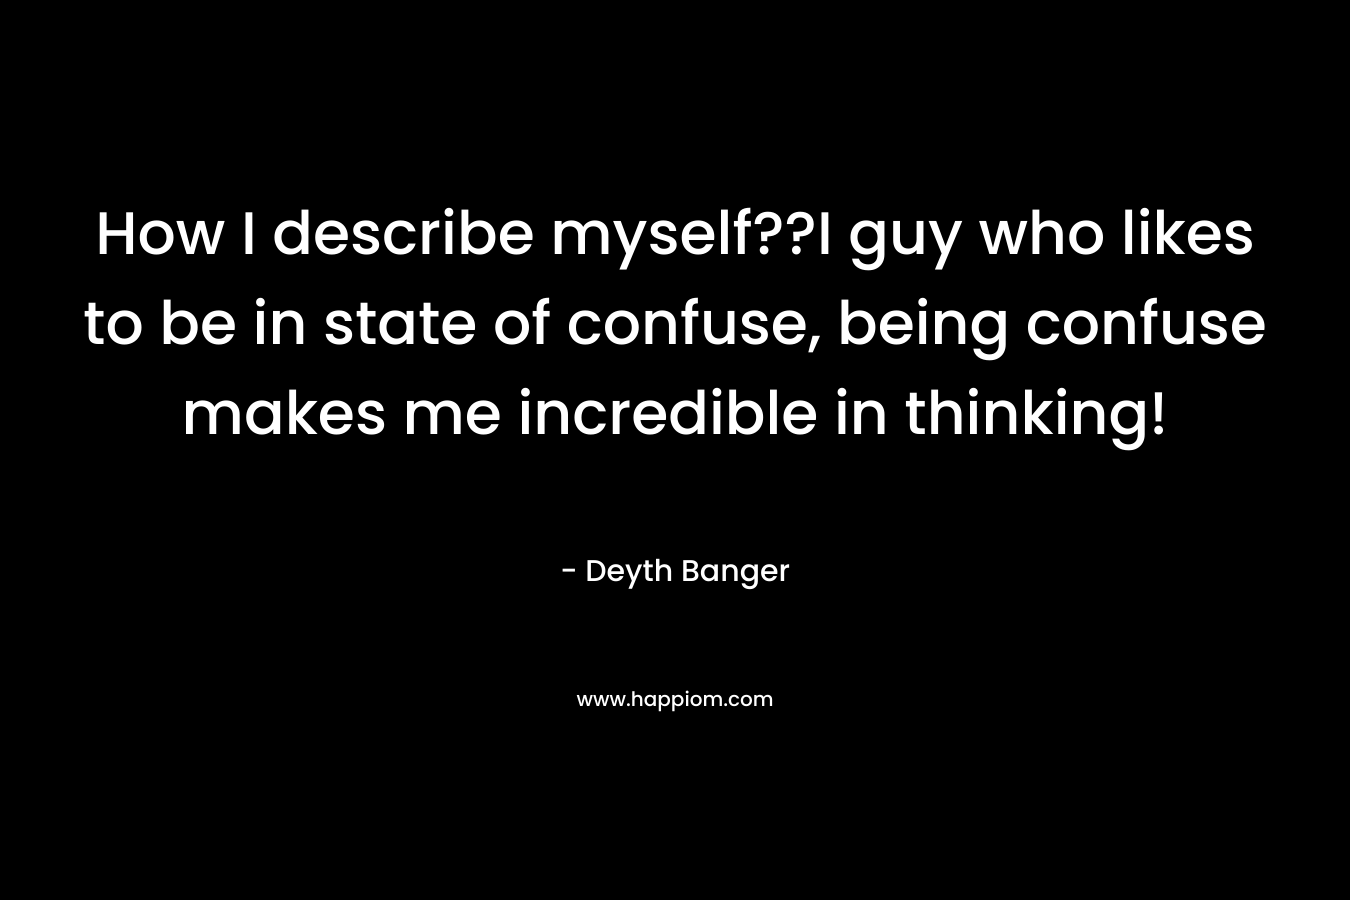 How I describe myself??I guy who likes to be in state of confuse, being confuse makes me incredible in thinking! – Deyth Banger